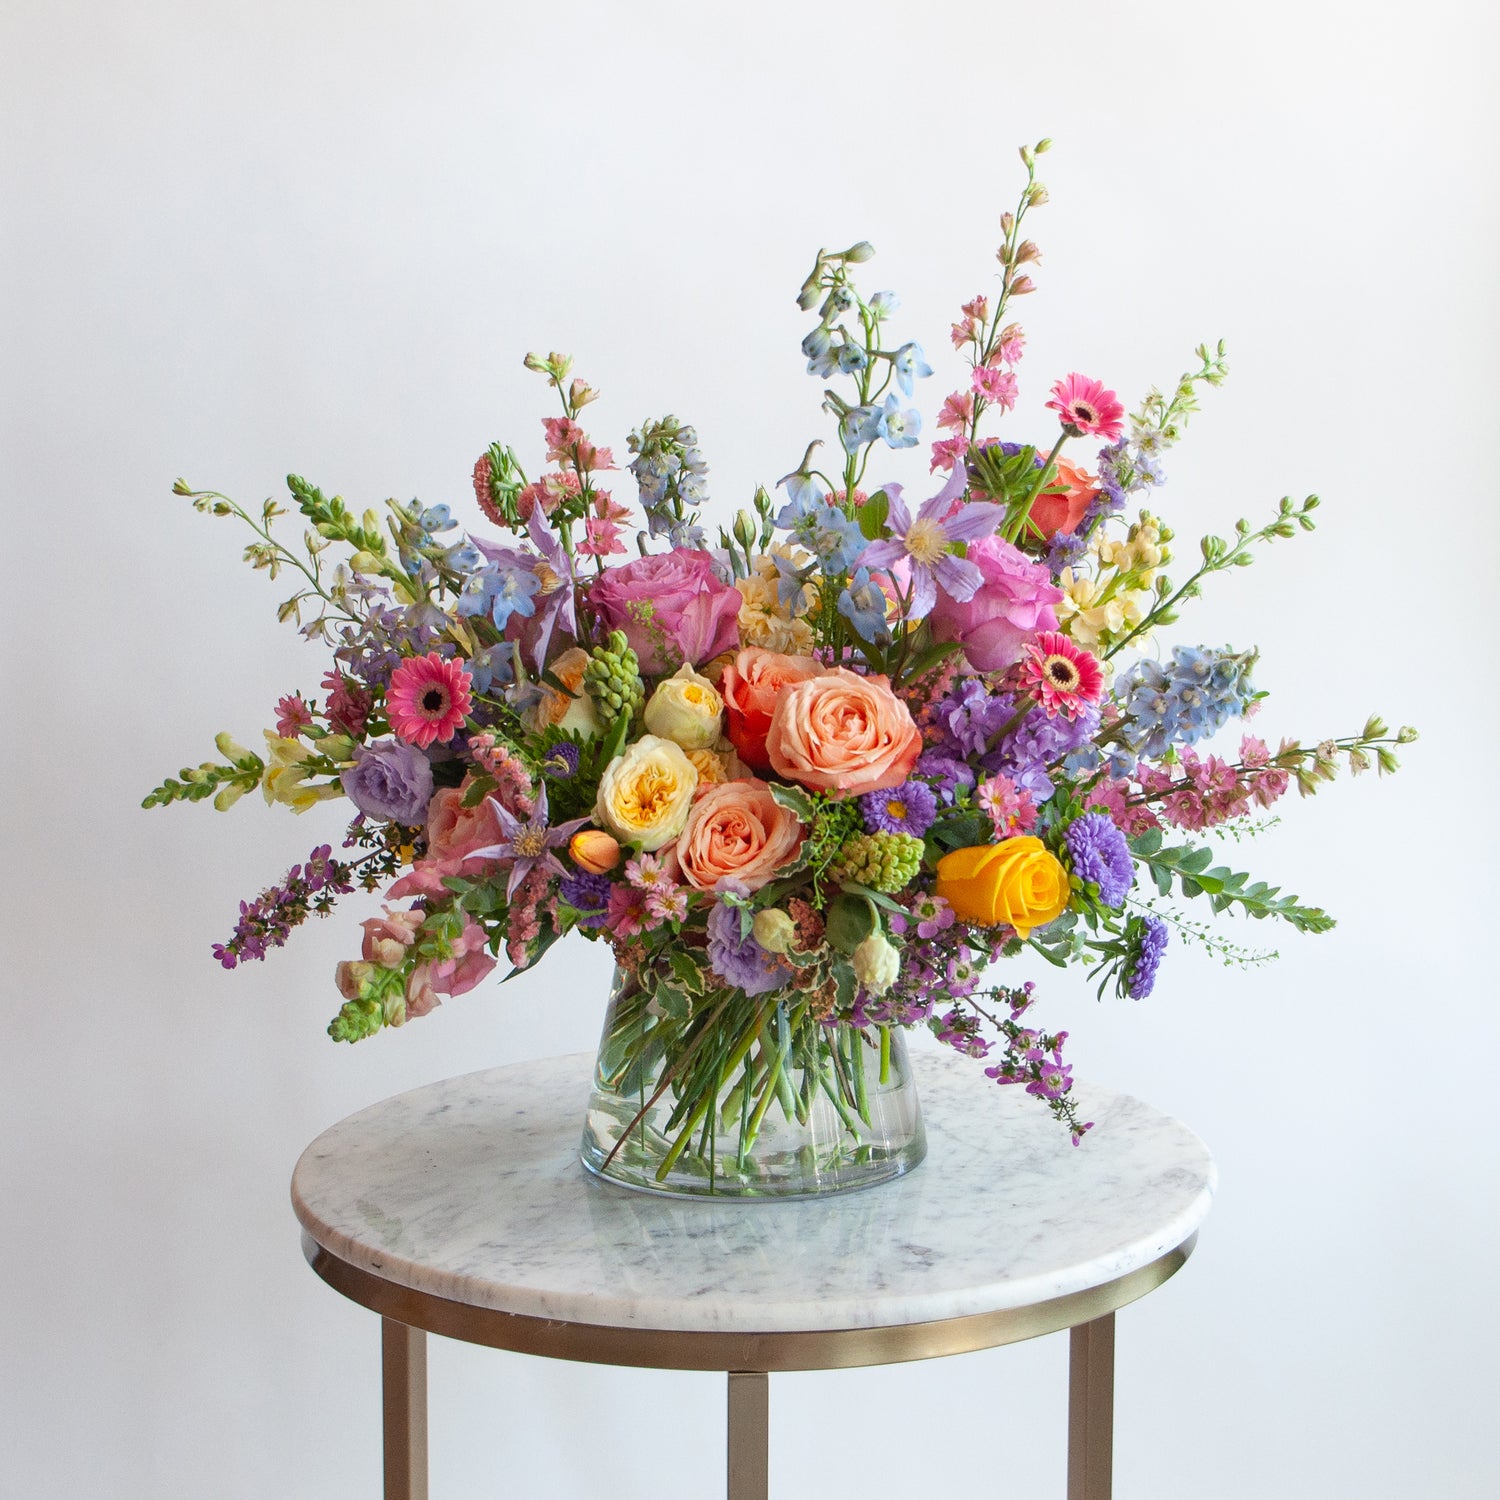 A glass vase with a medium flower arrangement sits on a marble table in front of a white backdrop. The flowers are many colors and include roses, tulips, daisies, snapdragon, clematis, stock, hyacinth, and delphinium.